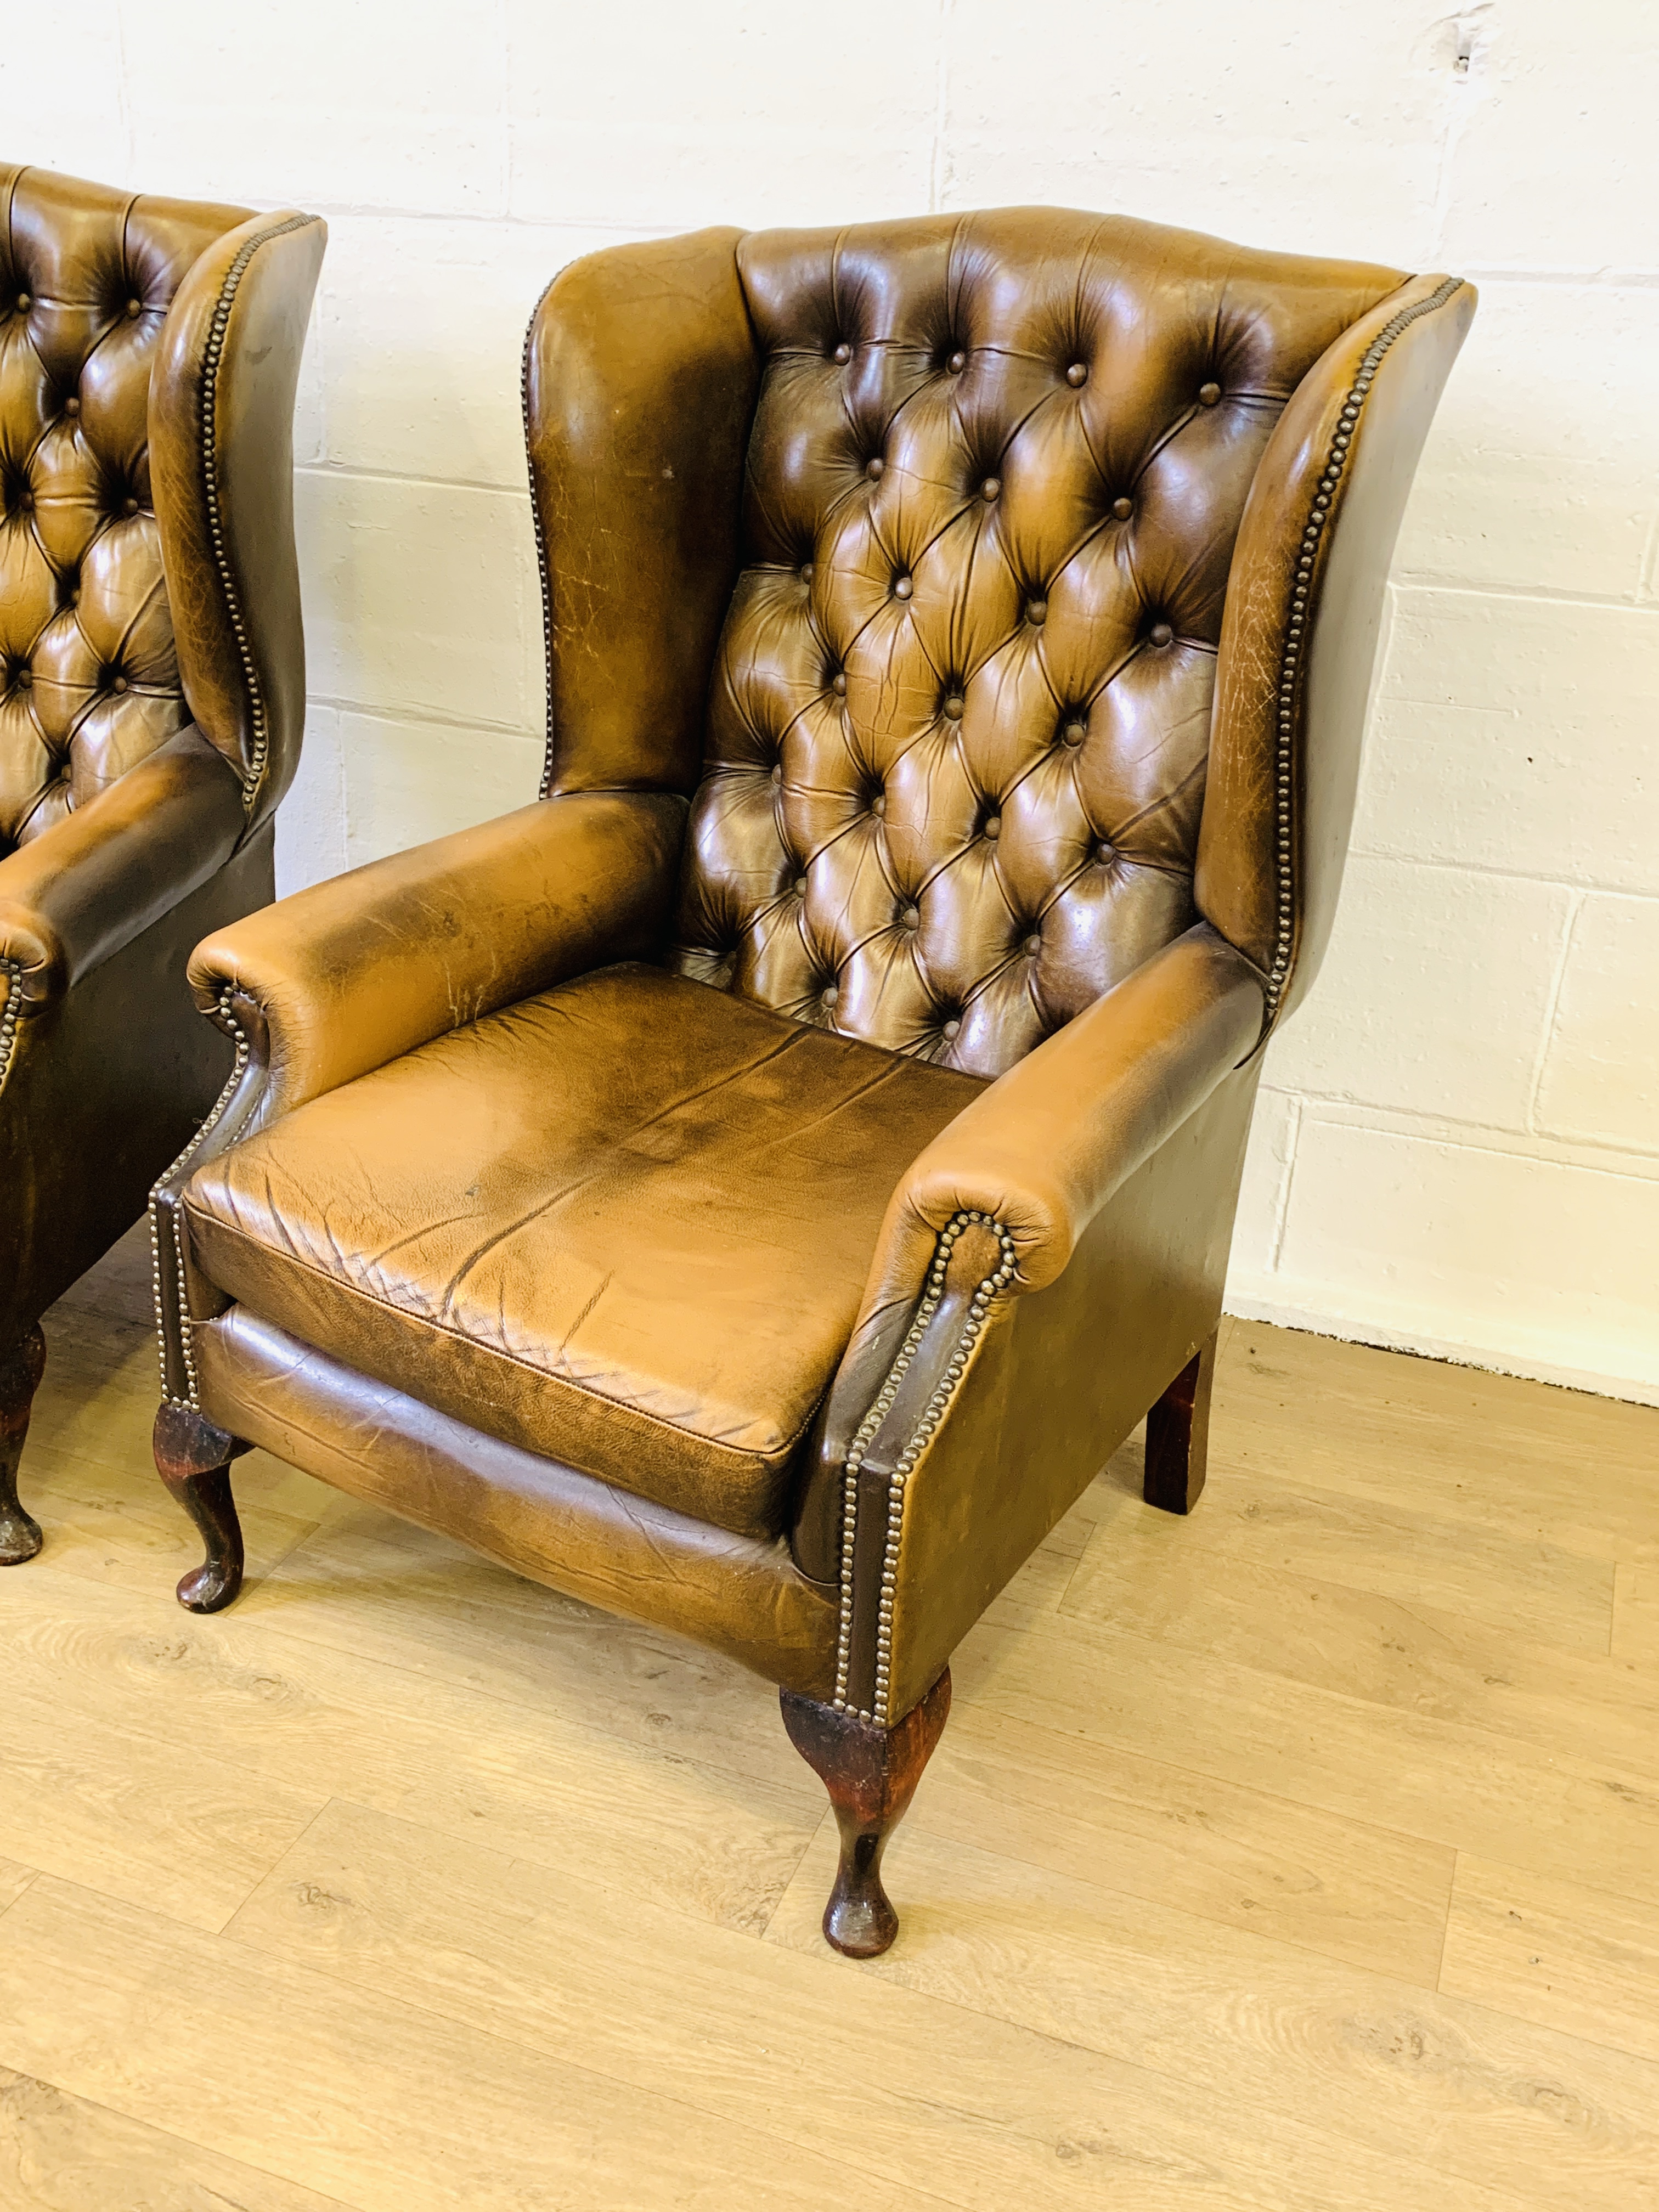 Two leather style armchairs - Image 5 of 5